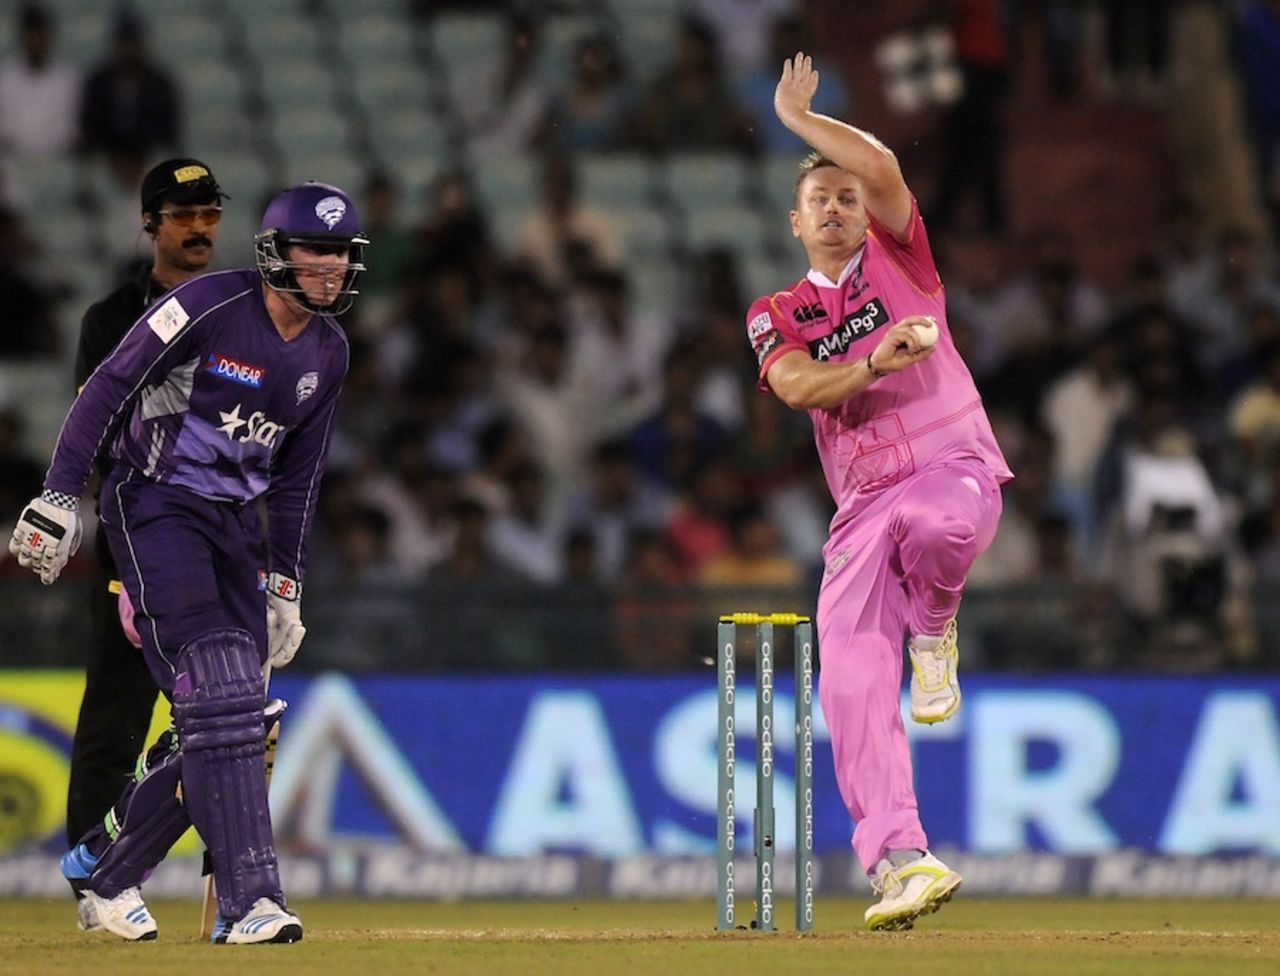 Scott Styris went for 12 in his first three overs and 16 in his fourth, Hobart Hurricanes v Northern Knights, CLT20, Group B, Raipur, September 23, 2014